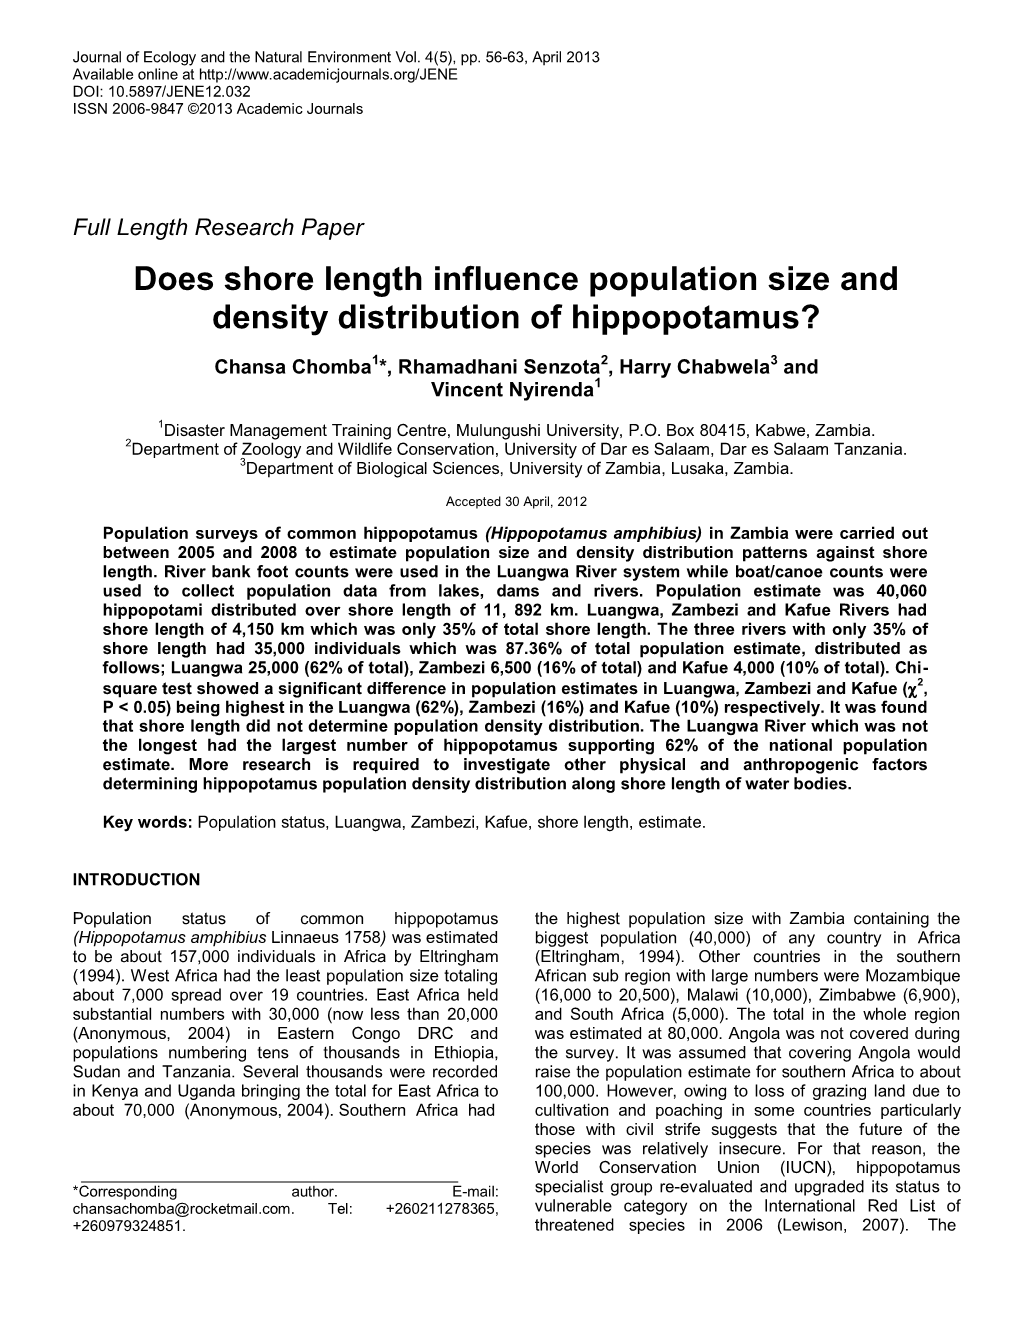 Does Shore Length Influence Population Size and Density Distribution of Hippopotamus?